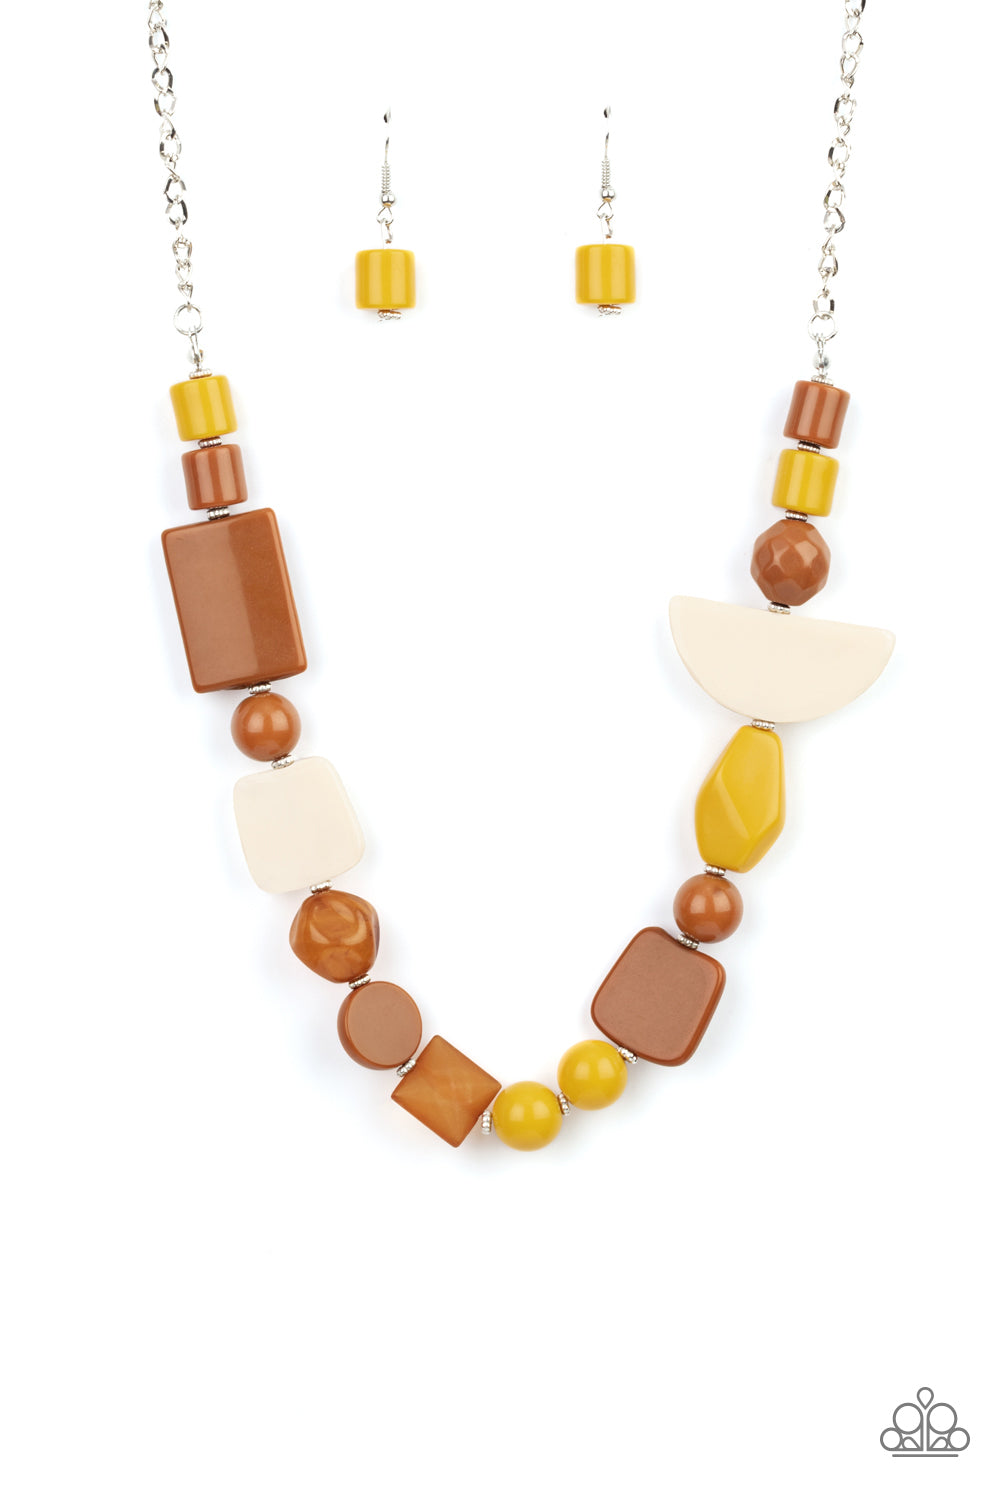 Tranquil Trendsetter - Yellow Multi Acrylic necklace (2021 FALL "PREVIEW")